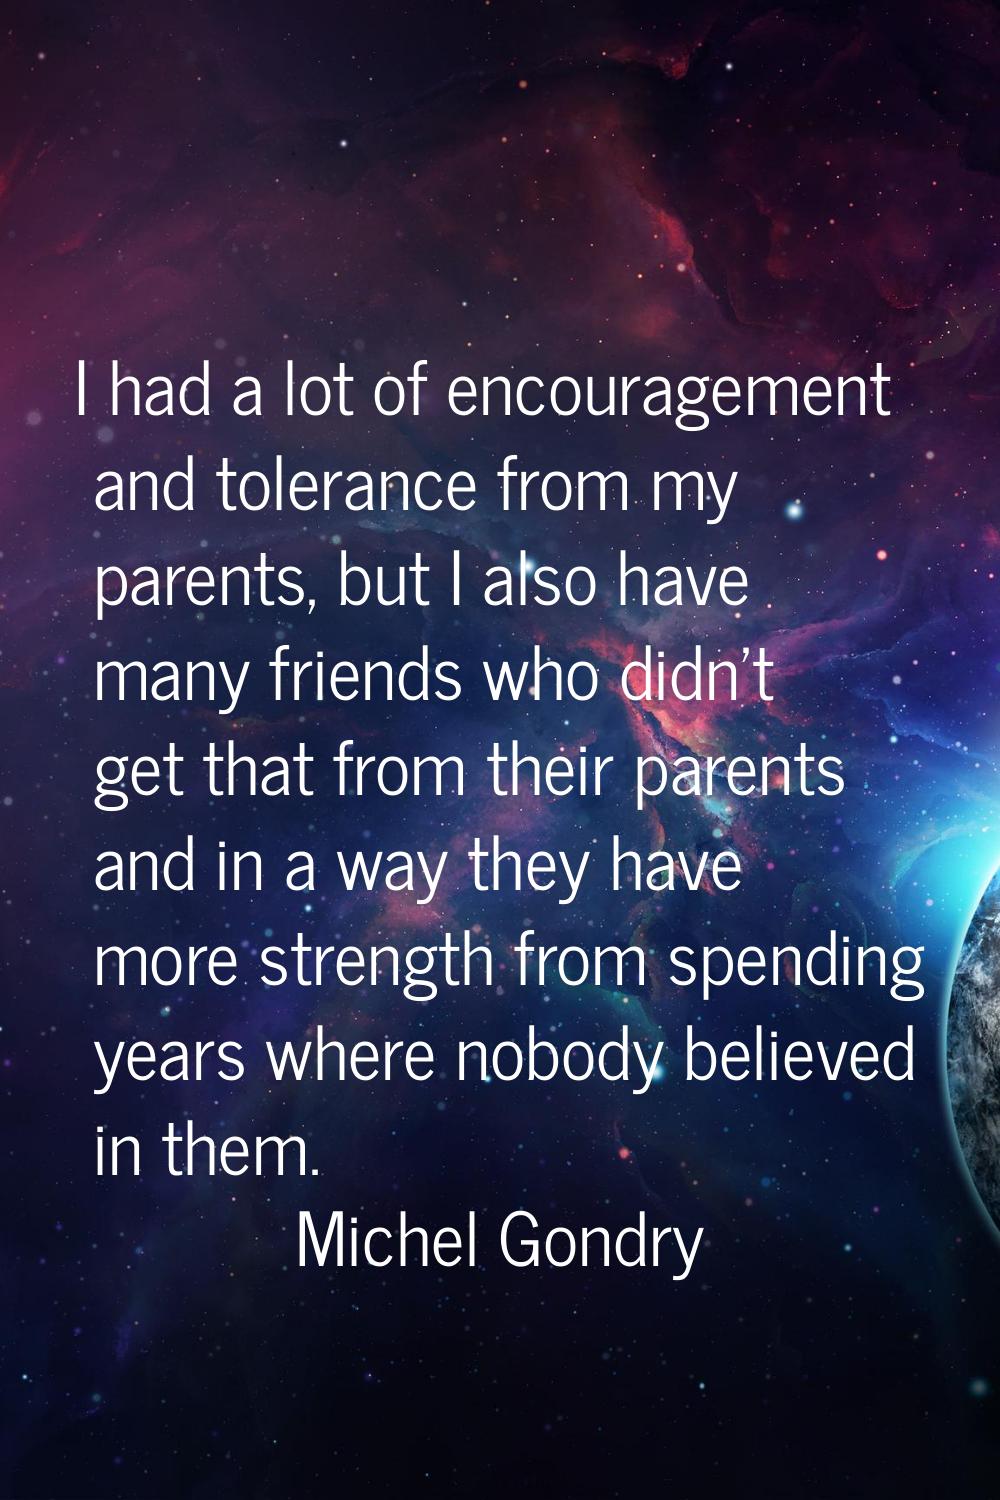 I had a lot of encouragement and tolerance from my parents, but I also have many friends who didn't